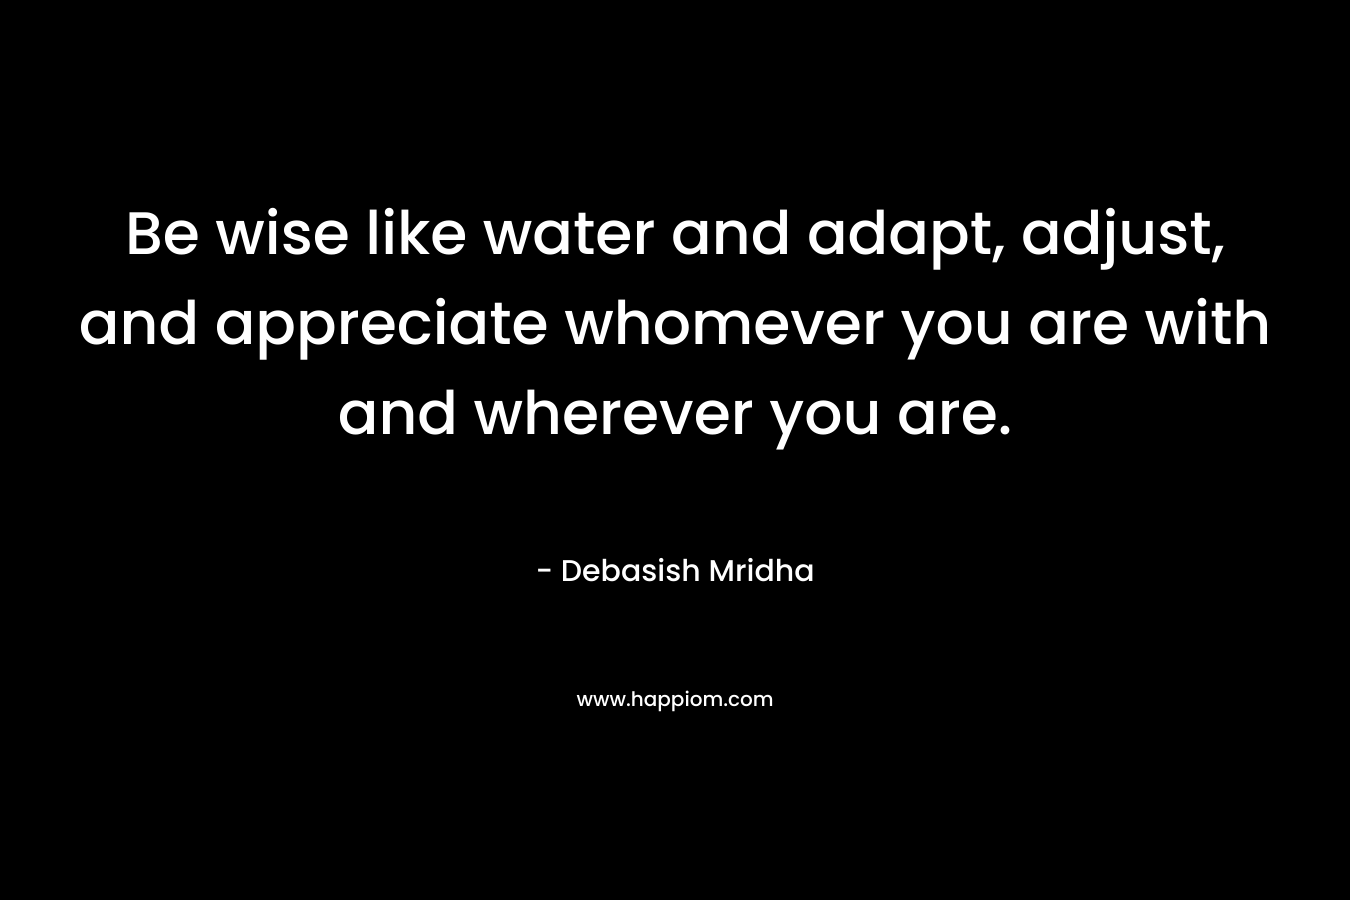 Be wise like water and adapt, adjust, and appreciate whomever you are with and wherever you are. – Debasish Mridha